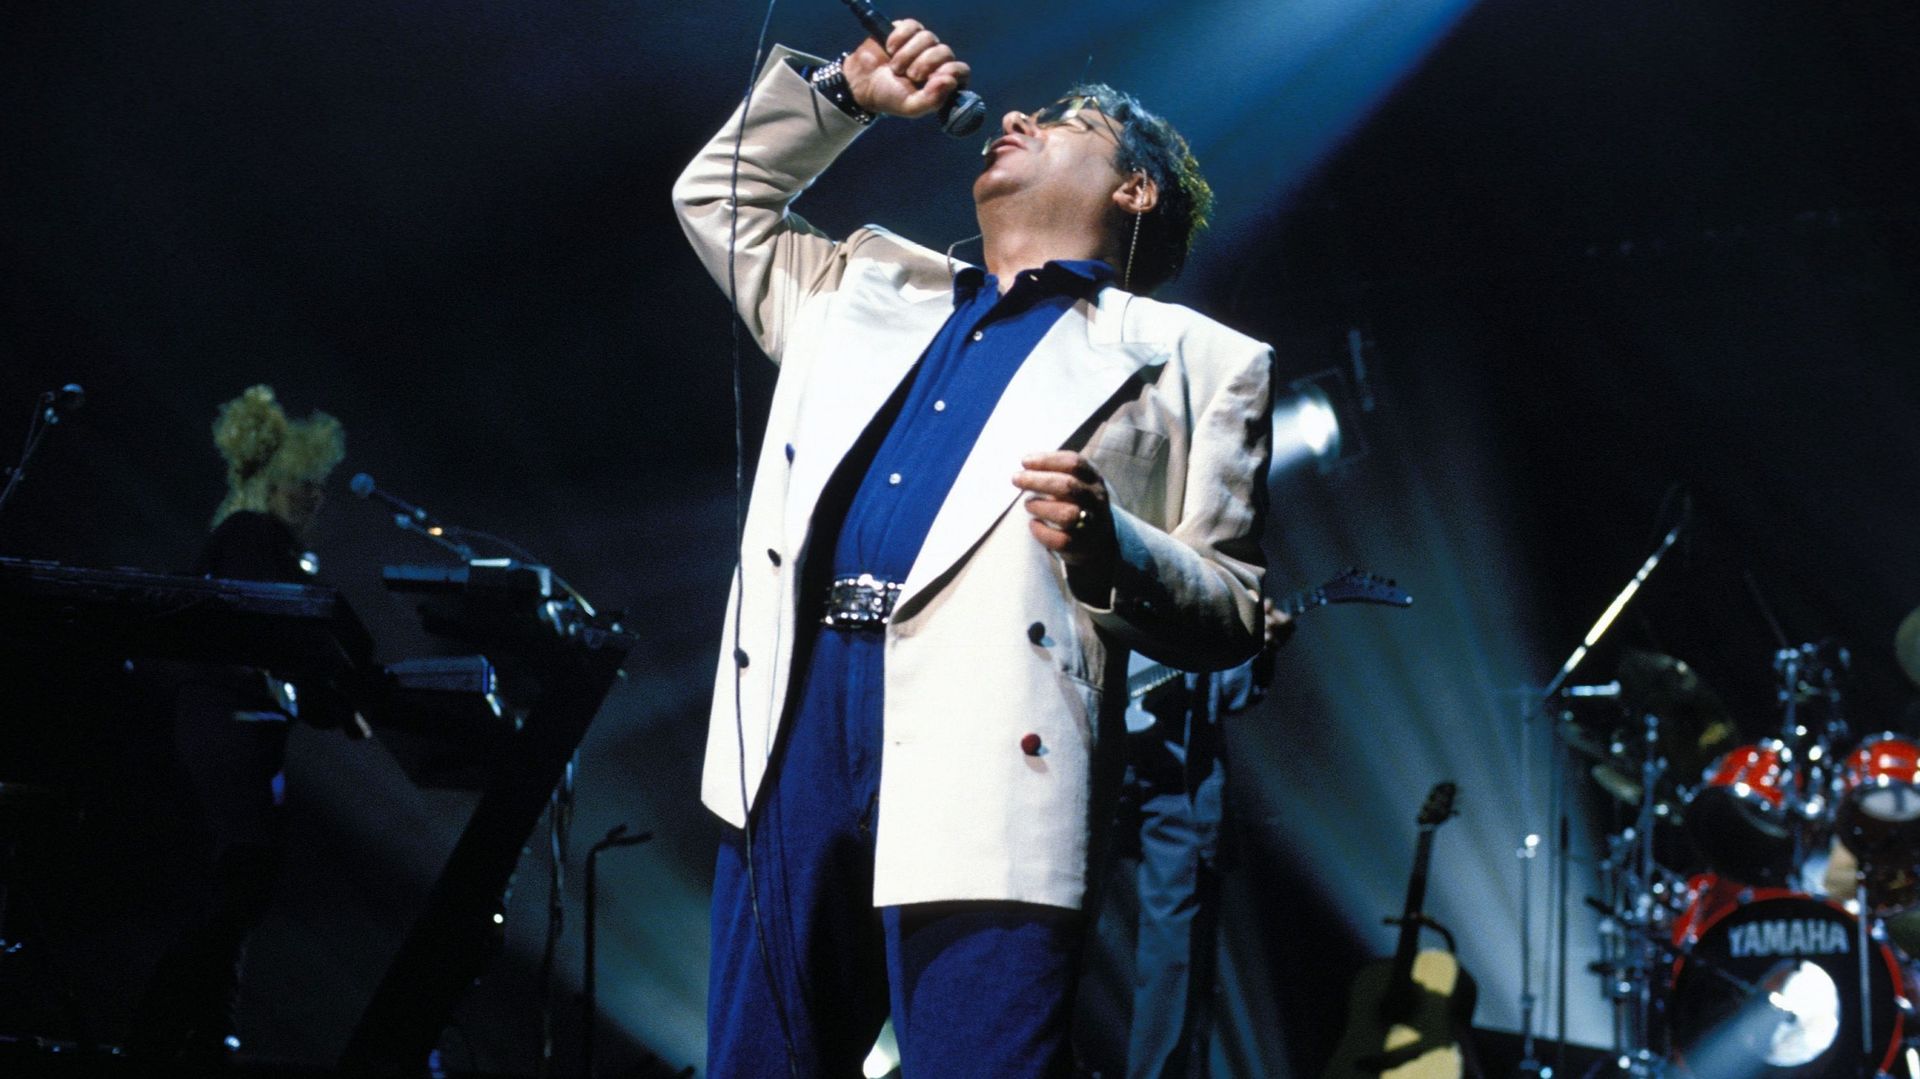 Claude Nougaro At The Zenith In Paris, France On April 19, 1989.